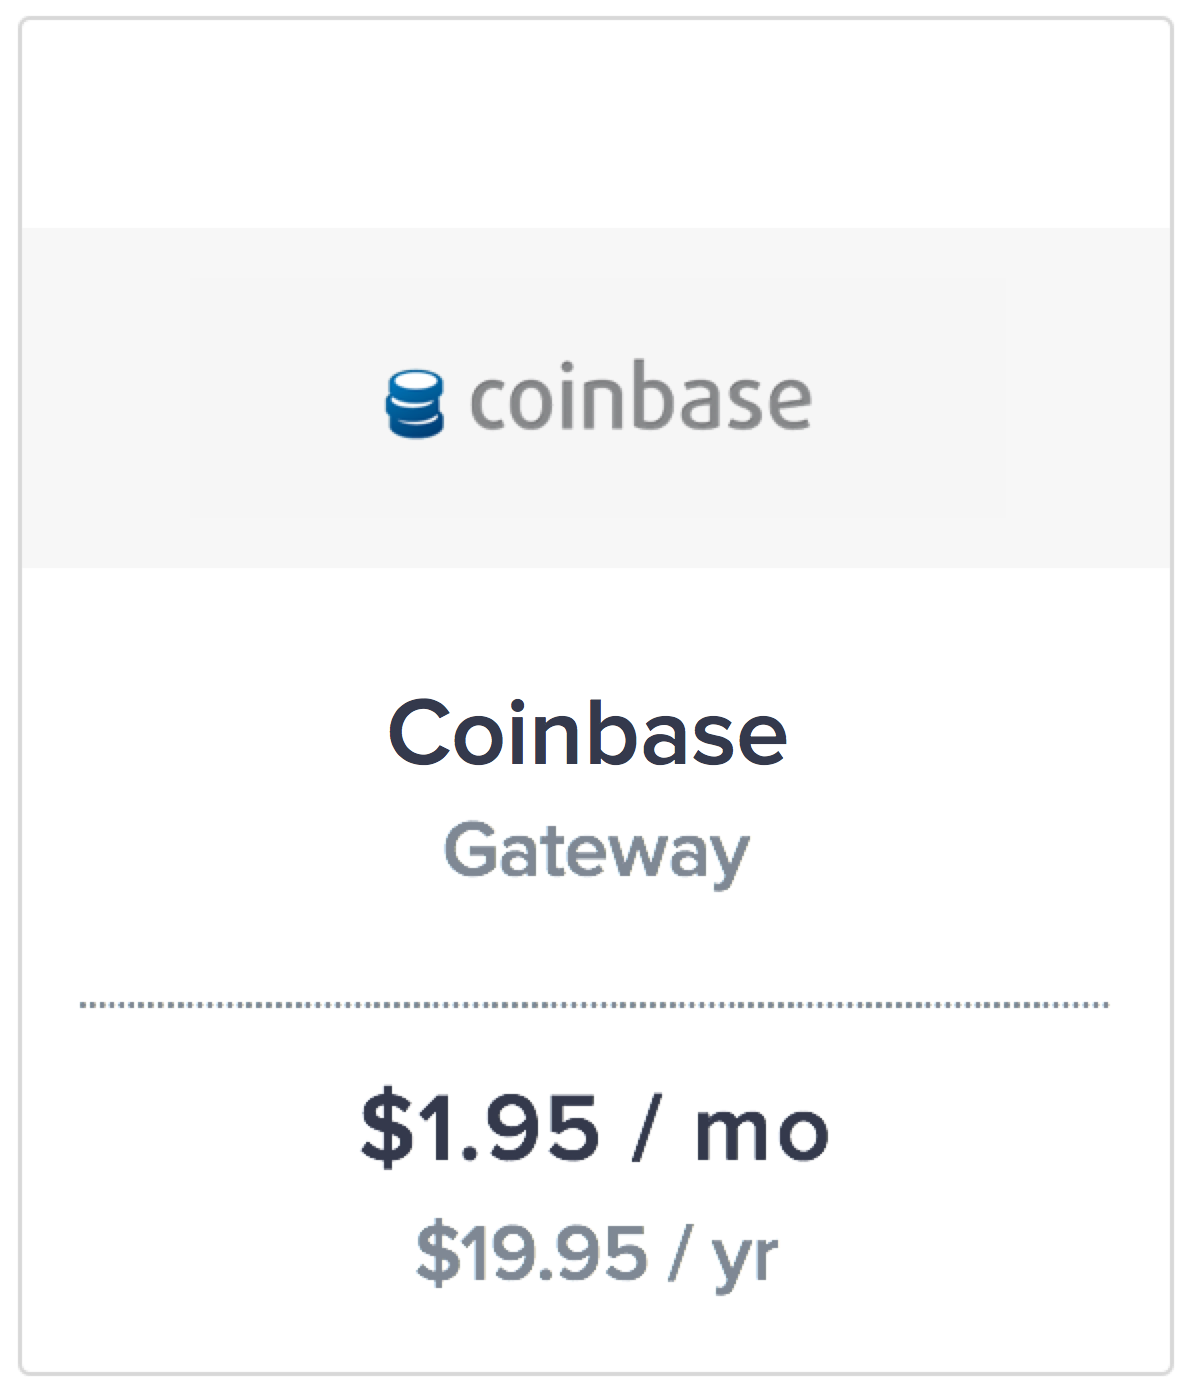 Accept Bitcoin Payments with Coinbase